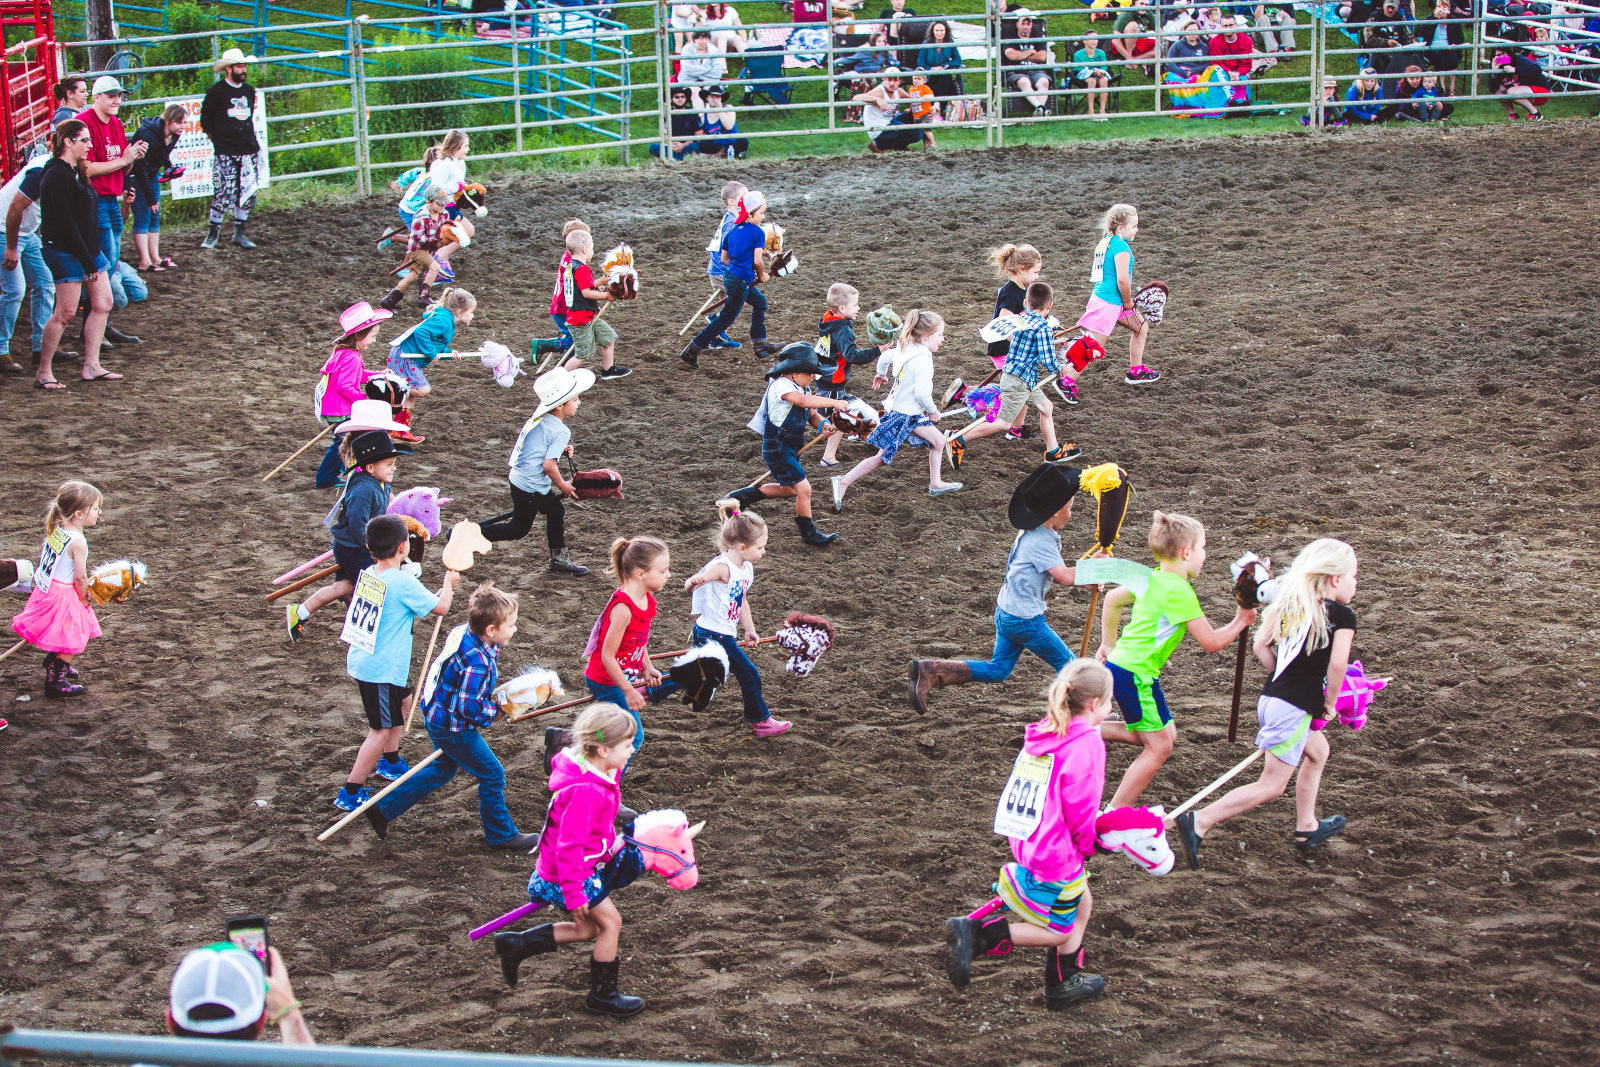 Stick-horse race at the Ellicottville Rodeo in July 2018